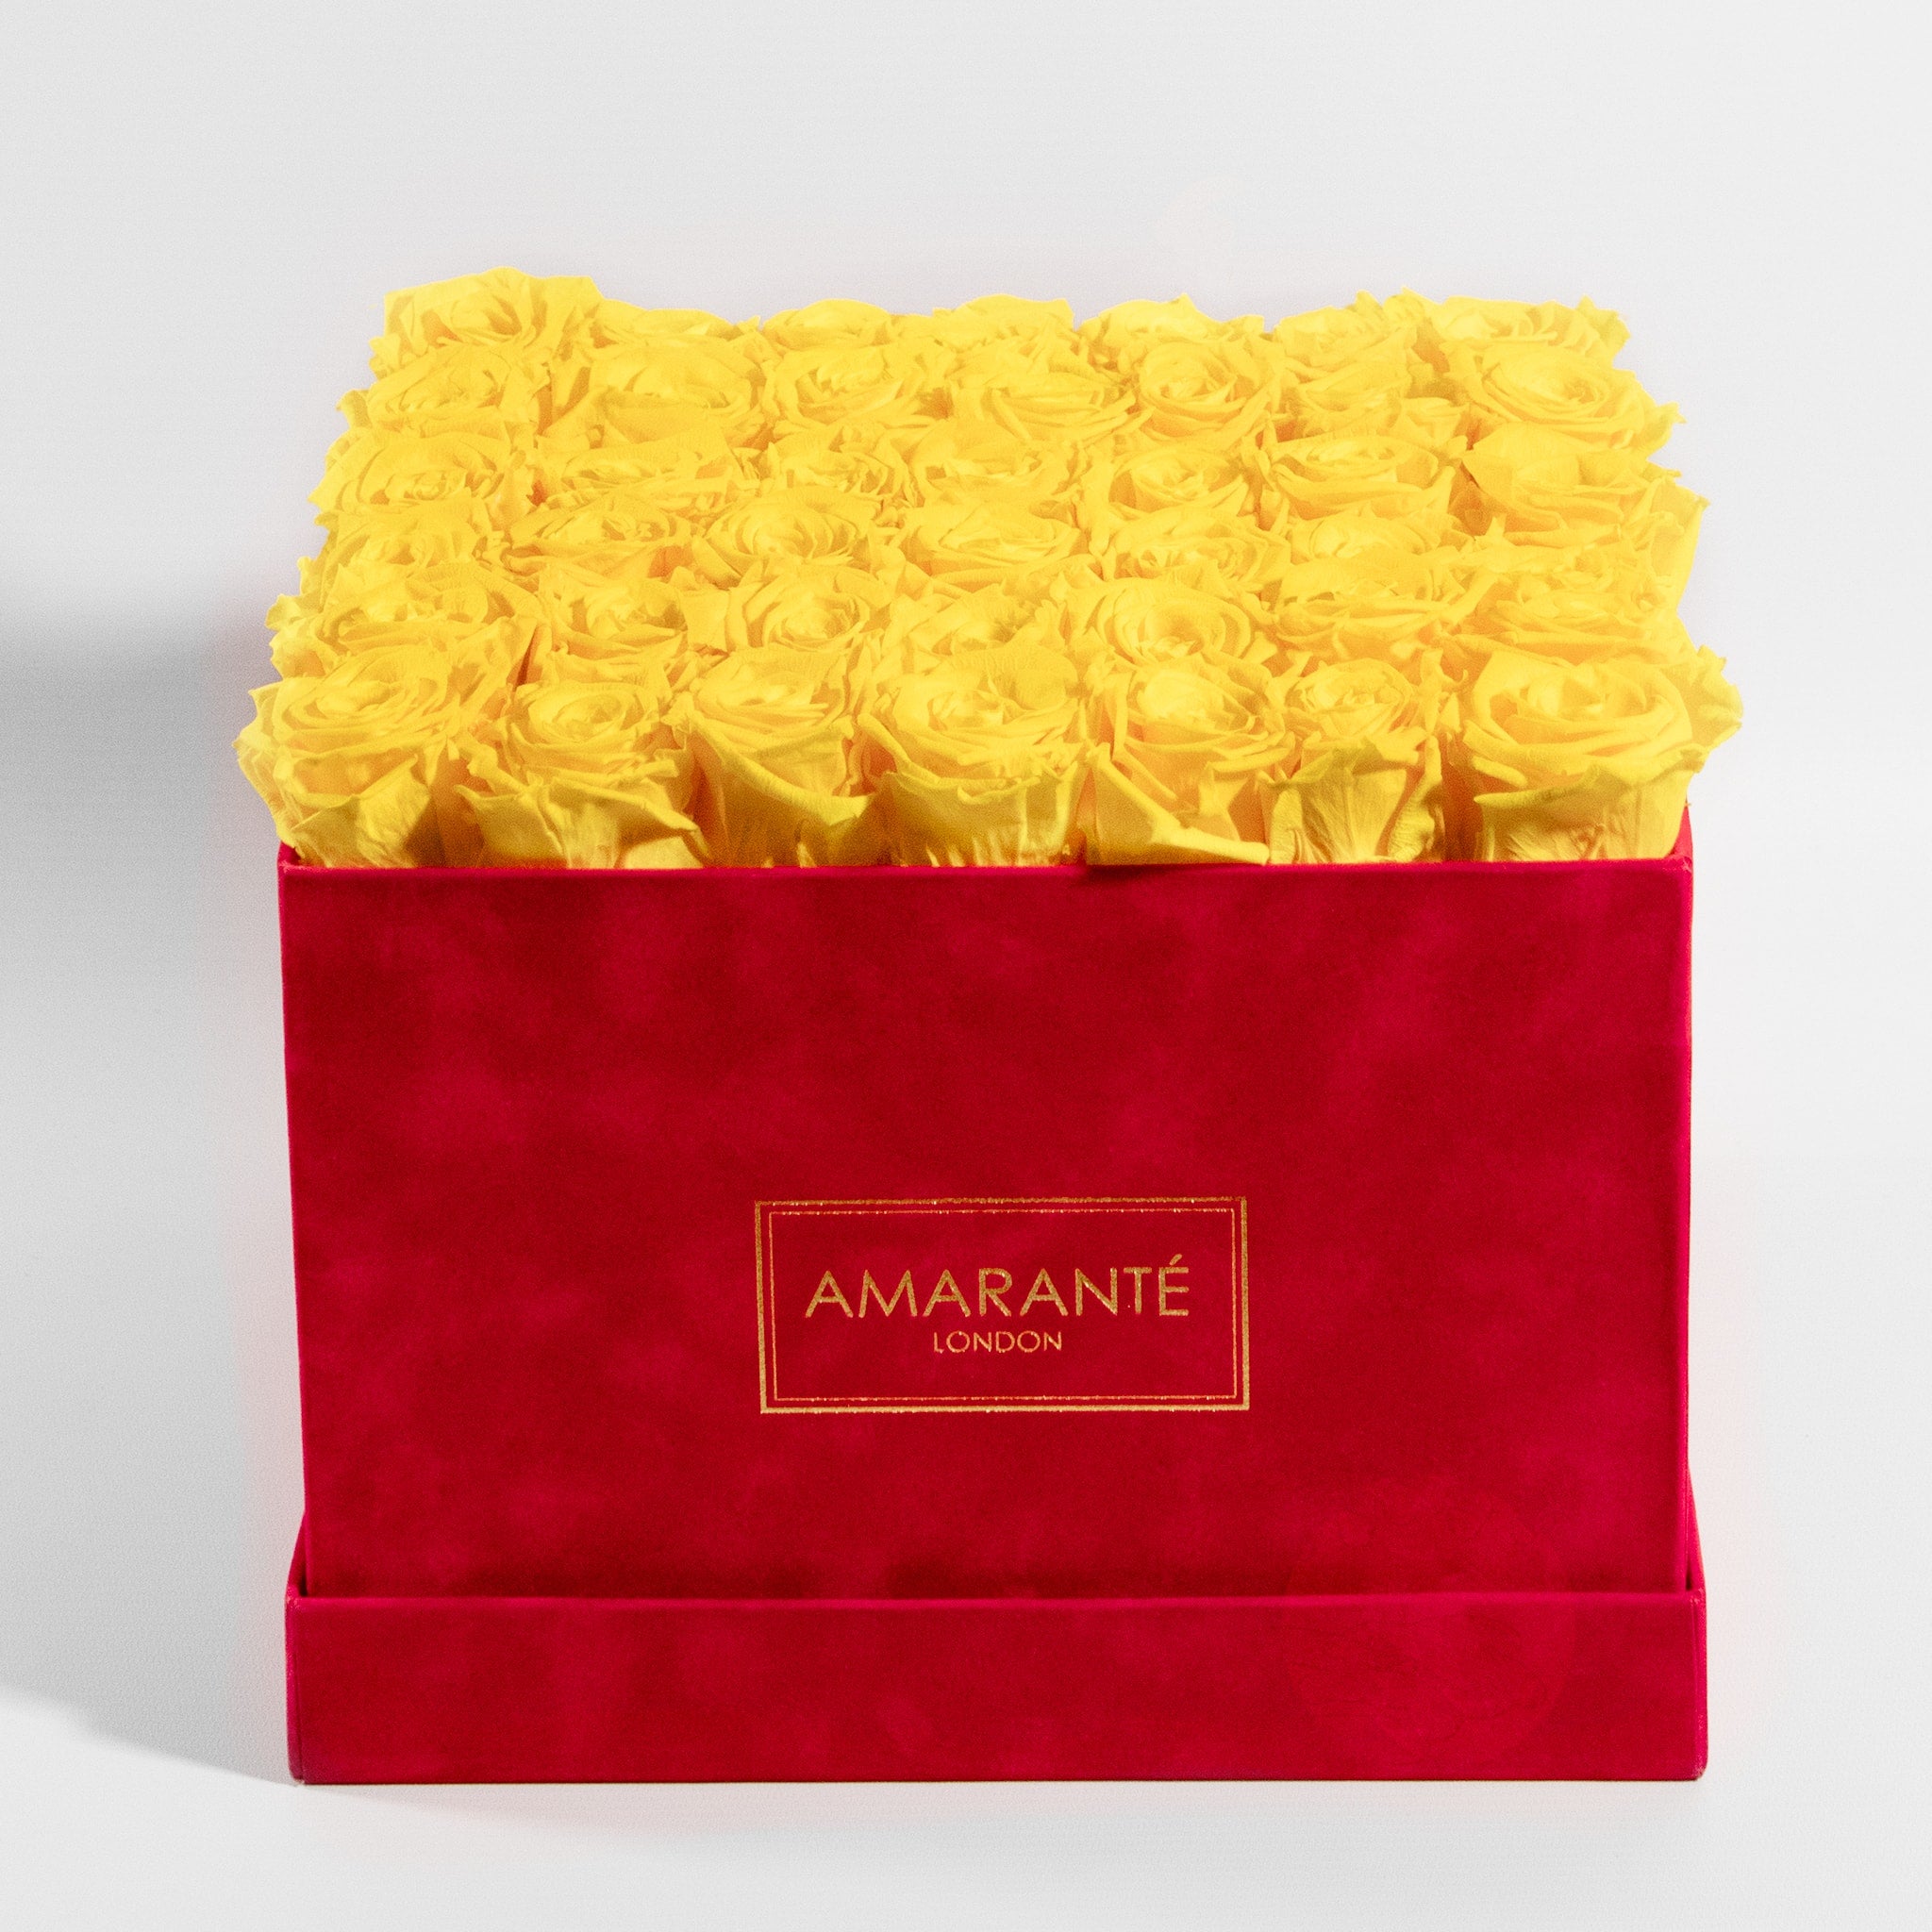 Delightful yellow roses exhibited in a magical red box 